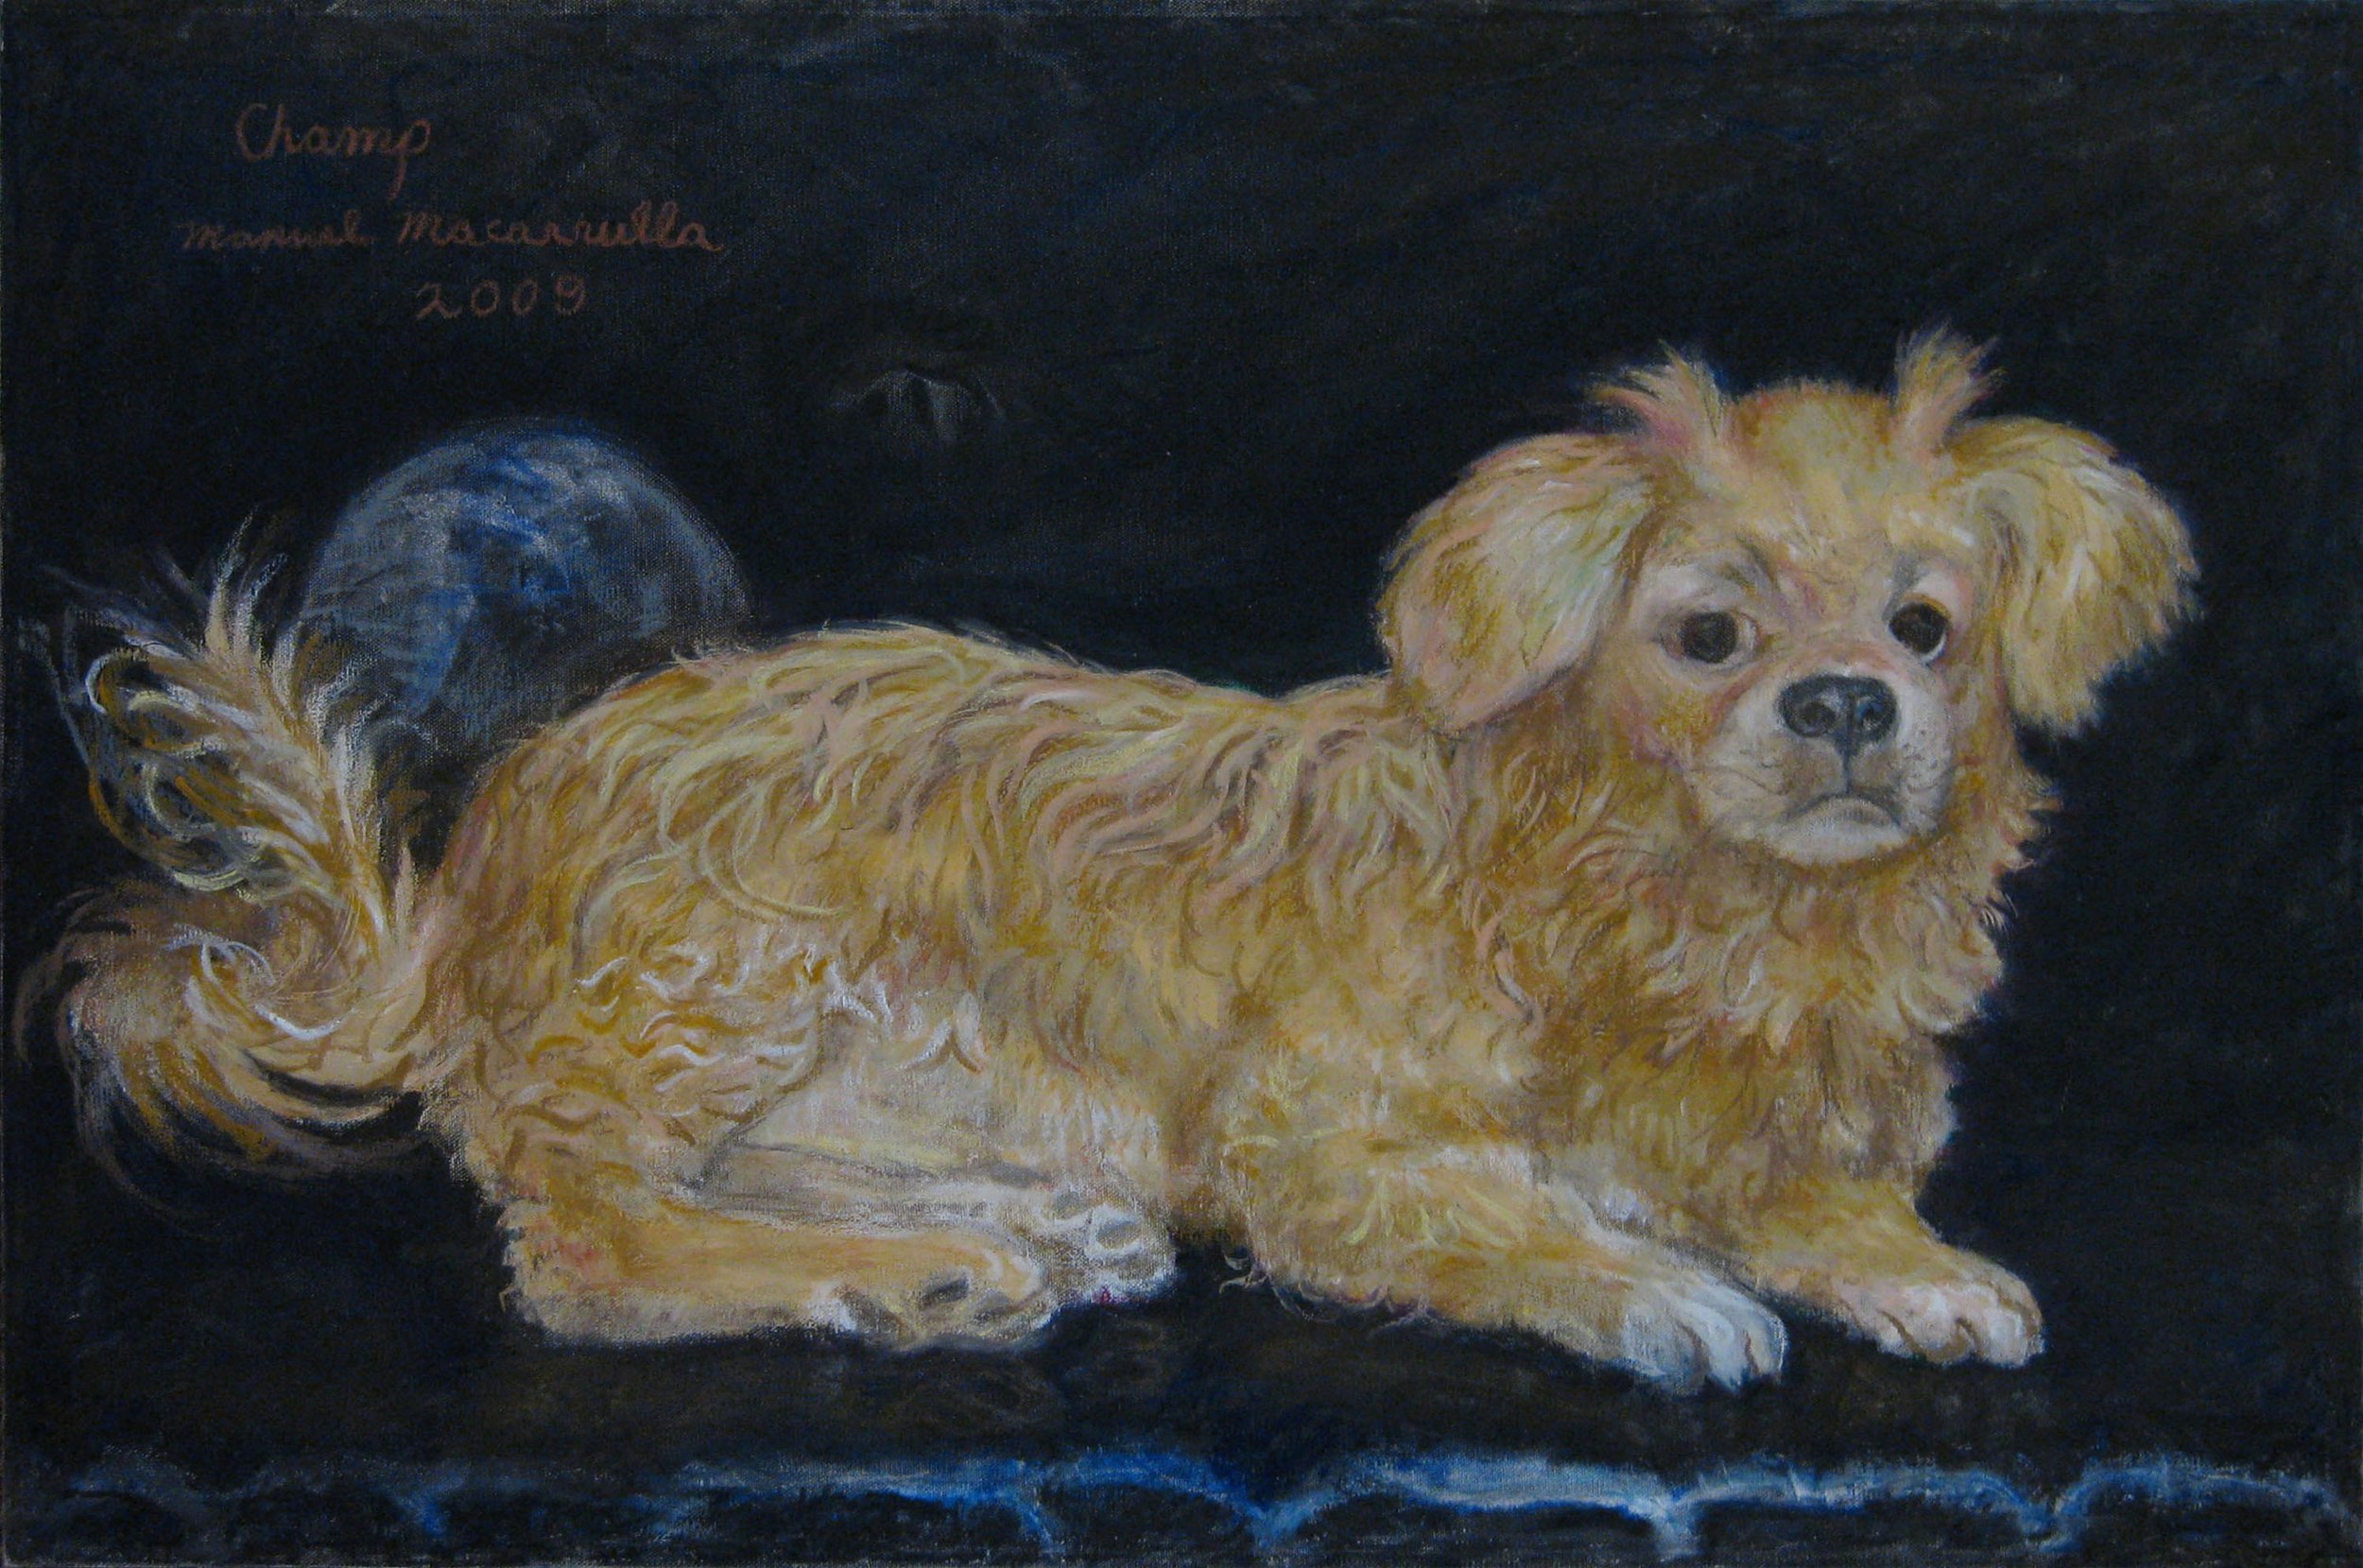    Champ,   2009. Oil bars and oil pastels on canvas. 20” X 30”. (Private collection.) 